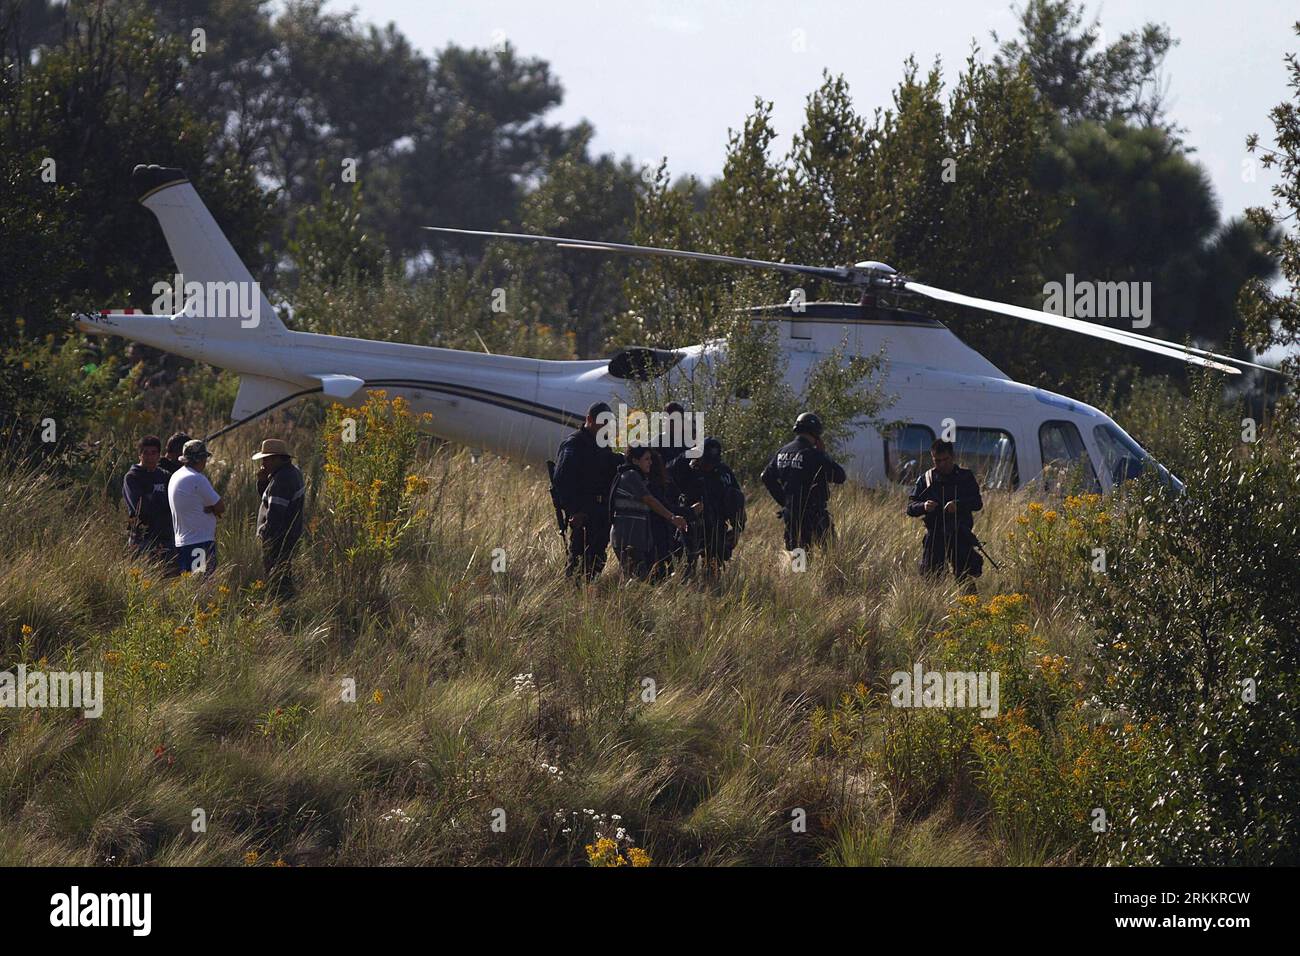 Bildnummer: 56273059  Datum: 11.11.2011  Copyright: imago/Xinhua (111112) -- CHALCO, Nov. 12, 2011 (Xinhua) -- Police officers guard the site where the helicopter carrying Mexican Interior Minister Francisco Blake Mora crashed, in the municipality of Chalco, State of Mexico, Mexico, on Nov. 11, 2011. Mexican Interior Minister Francisco Blake Mora and Vice Interior Minister Felipe Zamora were killed in a helicopter crash on Friday, official sources said. (Xinhua/Claudio Cuz) (zf) MEXICO-INTERIOR MINISTER-FRANCISCO BLAKE MORA-DEATH PUBLICATIONxNOTxINxCHN People Politik Absturz Hubschrauberabstur Stock Photo